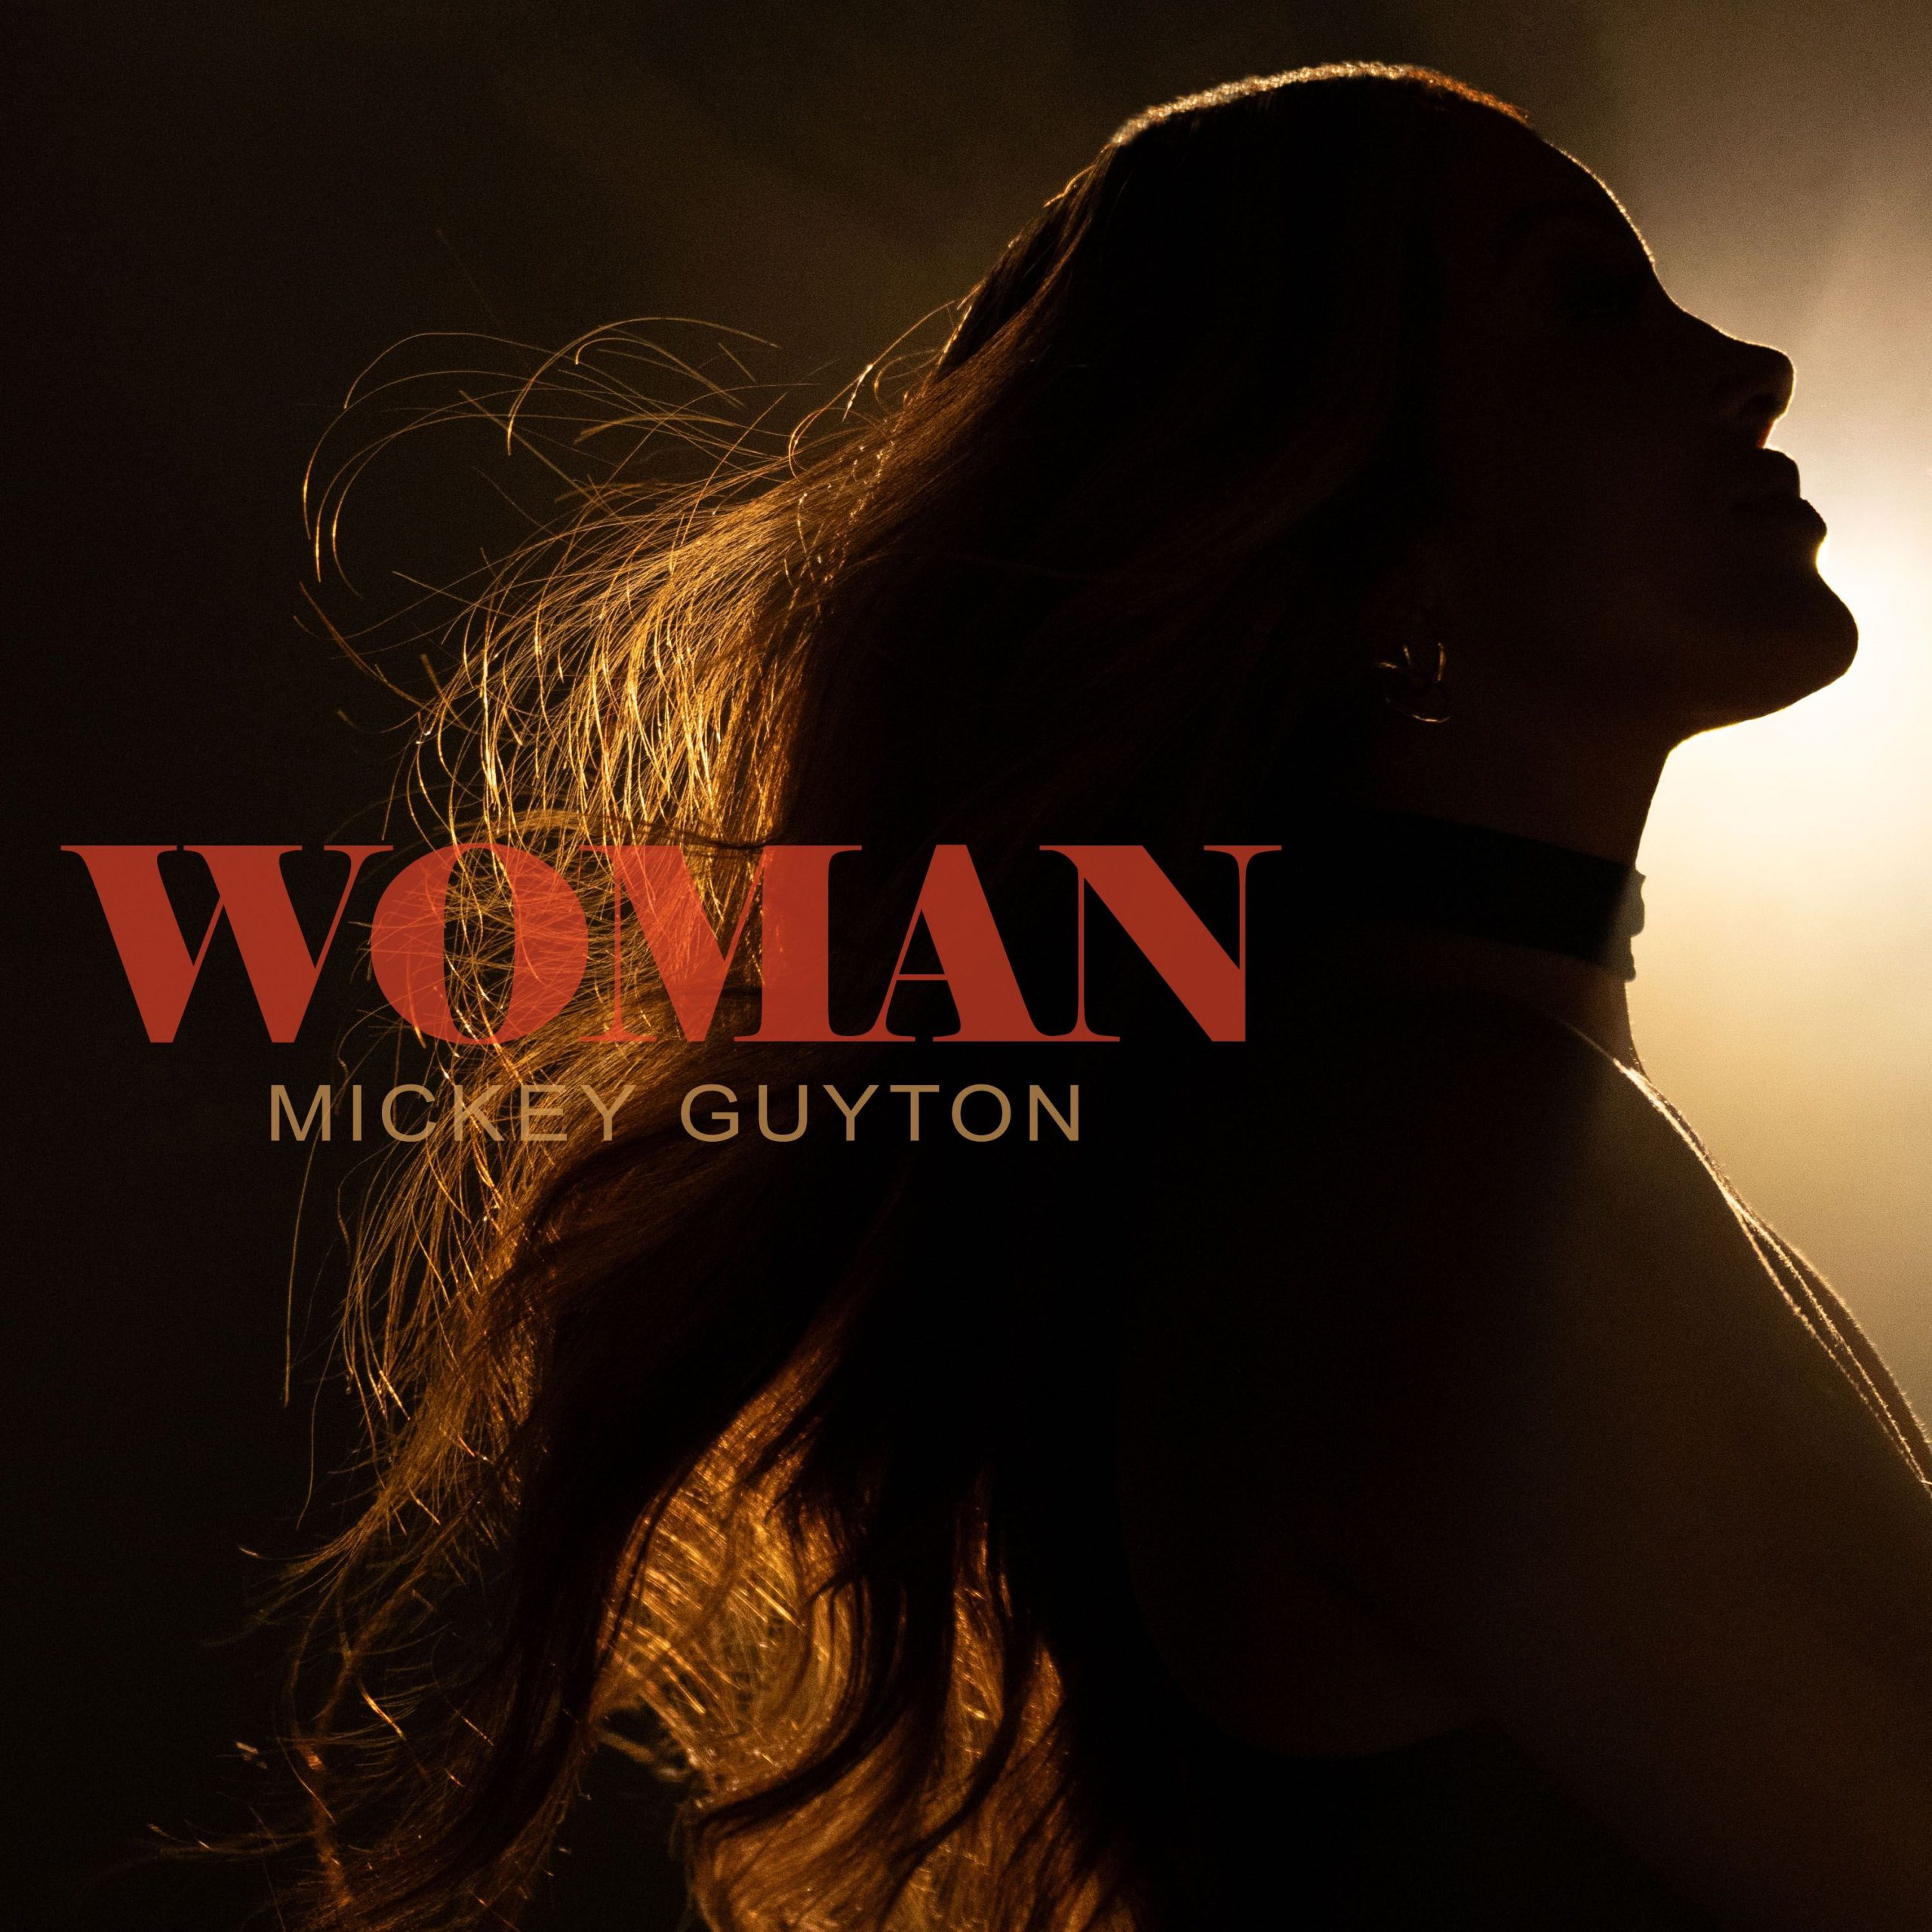 MICKEY GUYTON RELEASES FEMALE ANTHEM, “WOMAN”